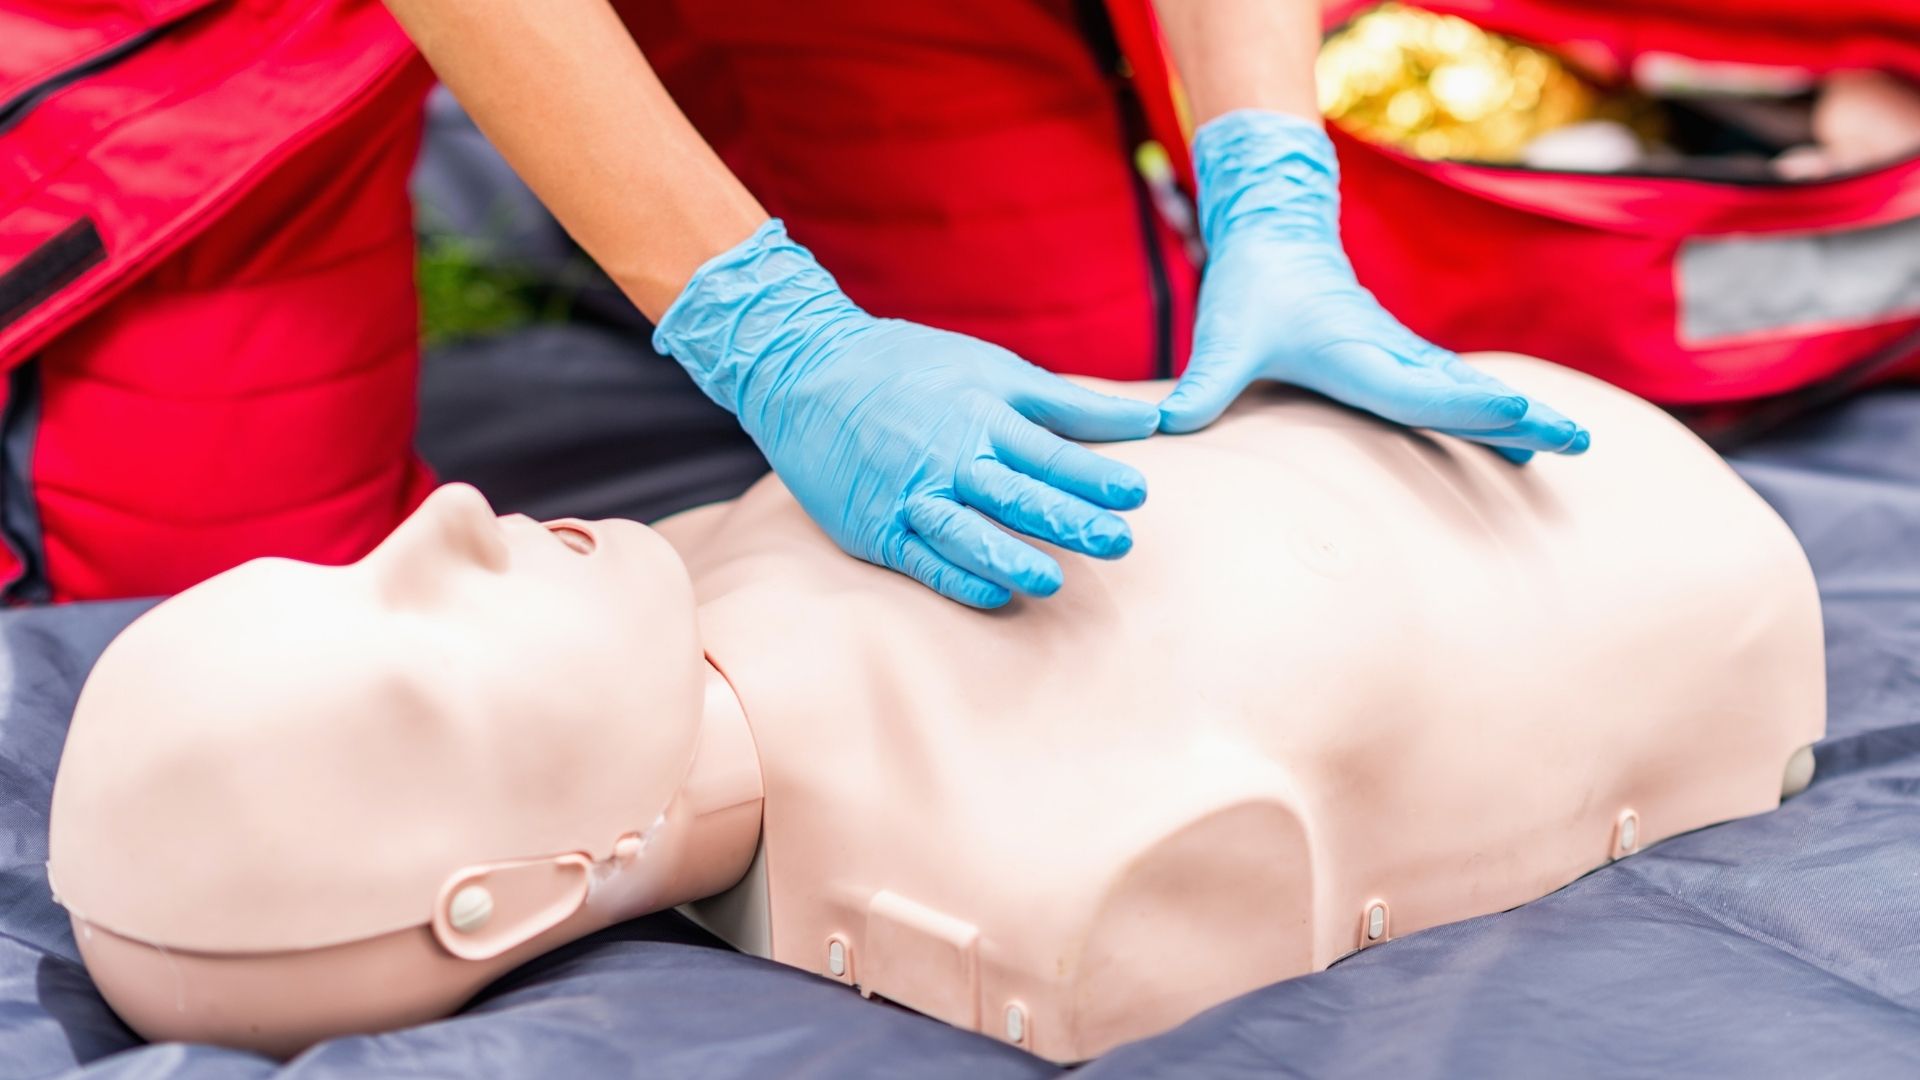 Can You Do CPR on a Heart Attack Victim